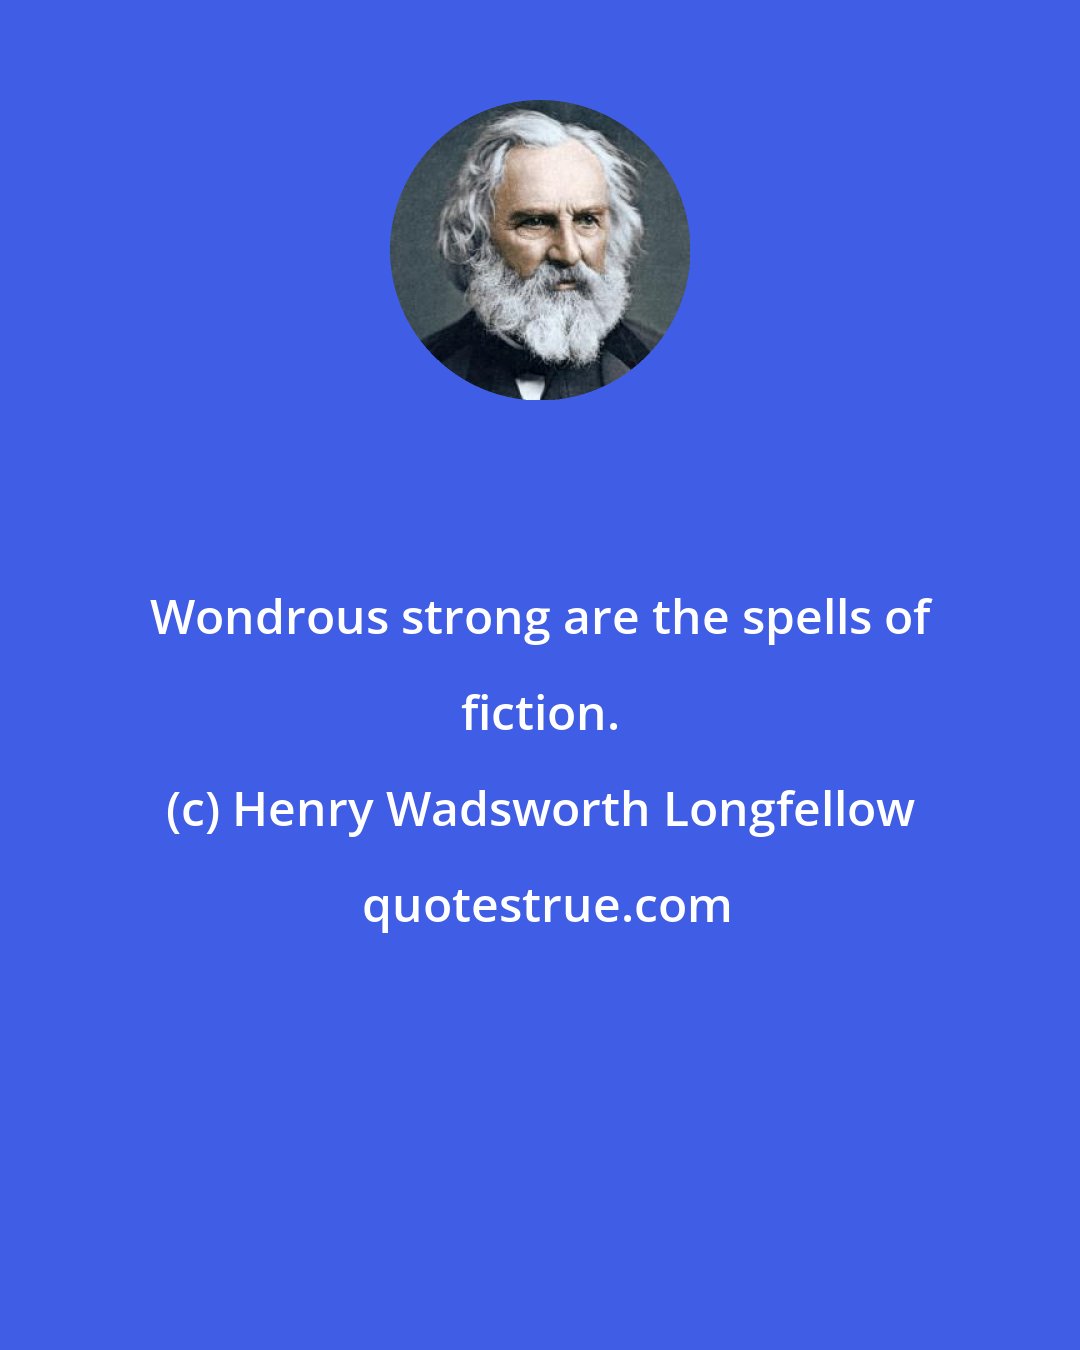 Henry Wadsworth Longfellow: Wondrous strong are the spells of fiction.